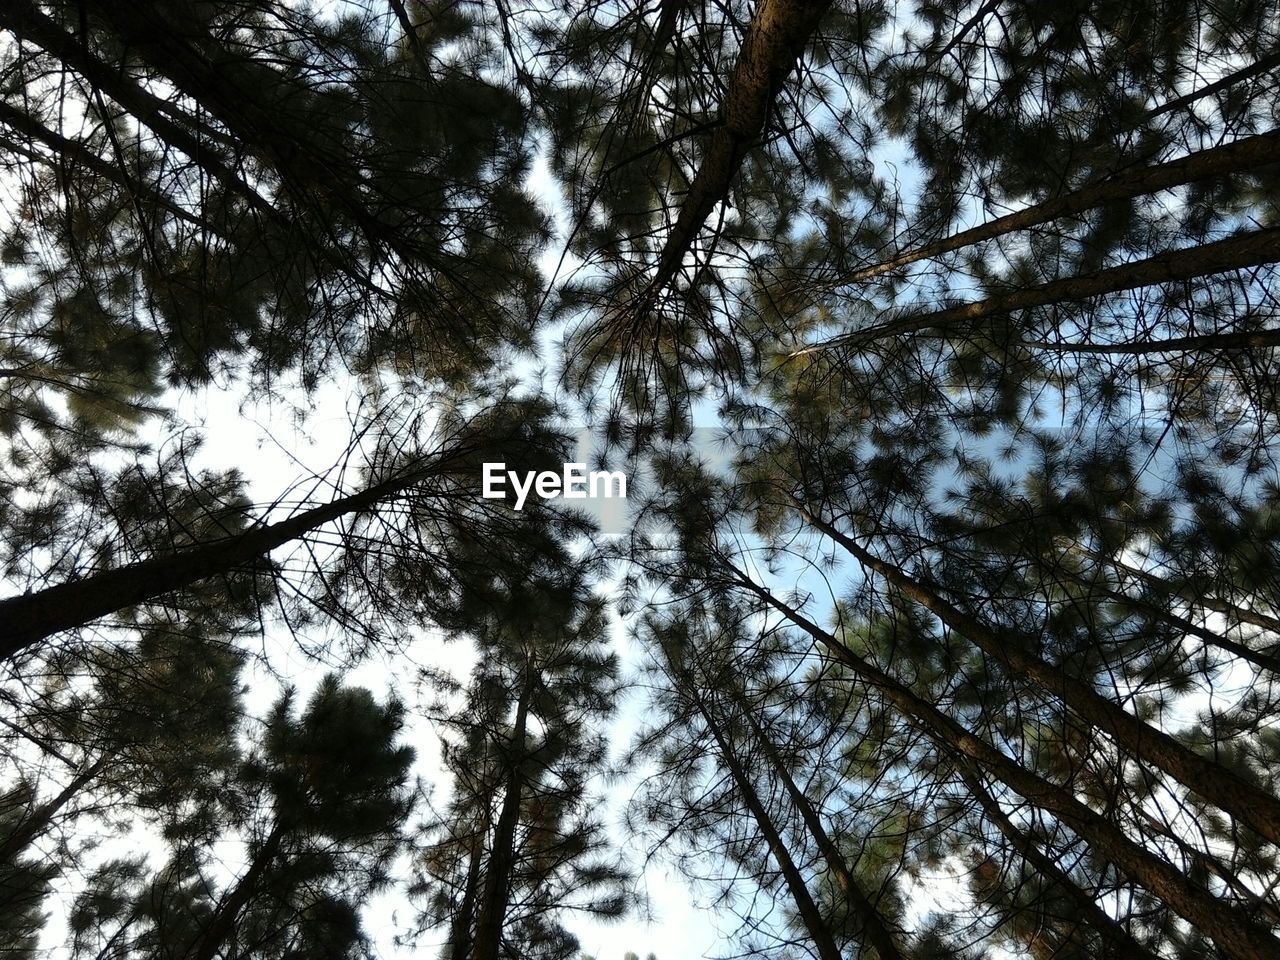 Directly below shot of trees growing in forest against sky